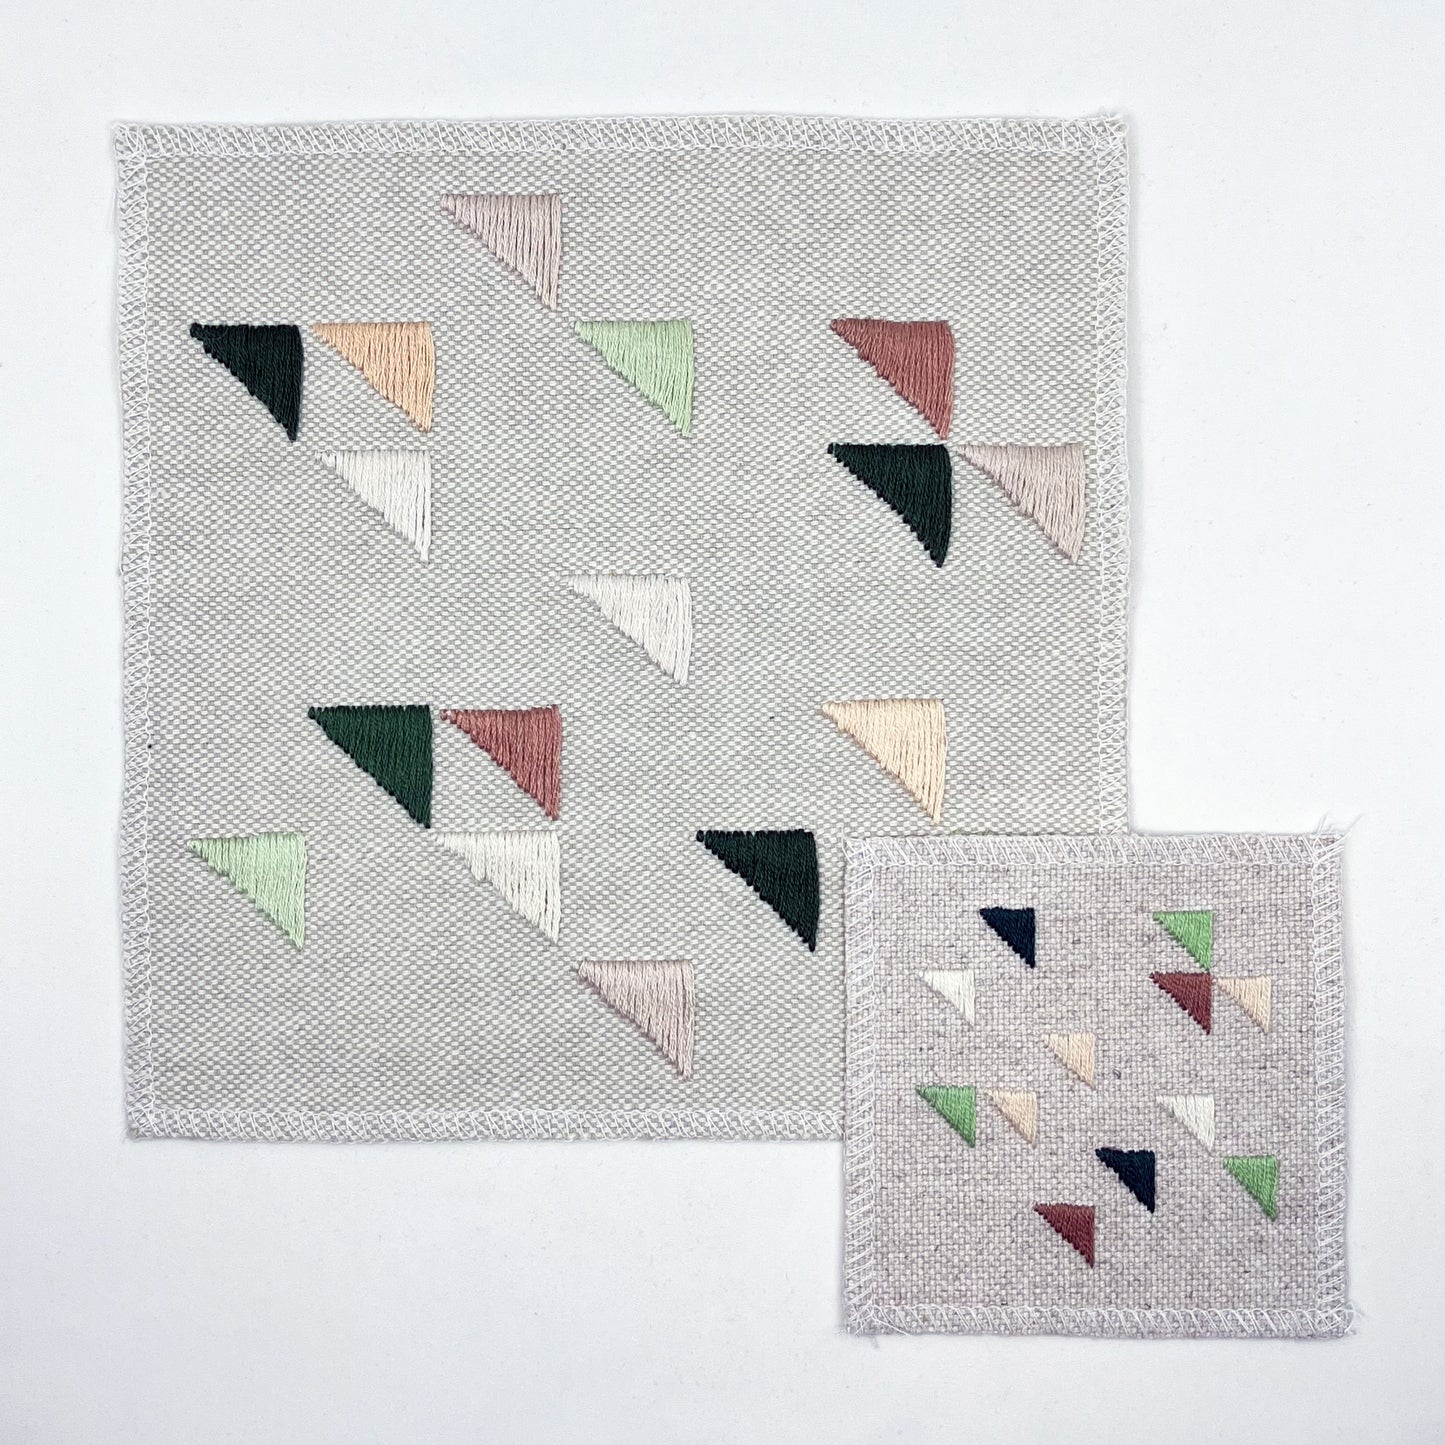 two square natural colored patches in different sizes embroidered with randomly placed triangles in peaches, mauves and greens, on a white background